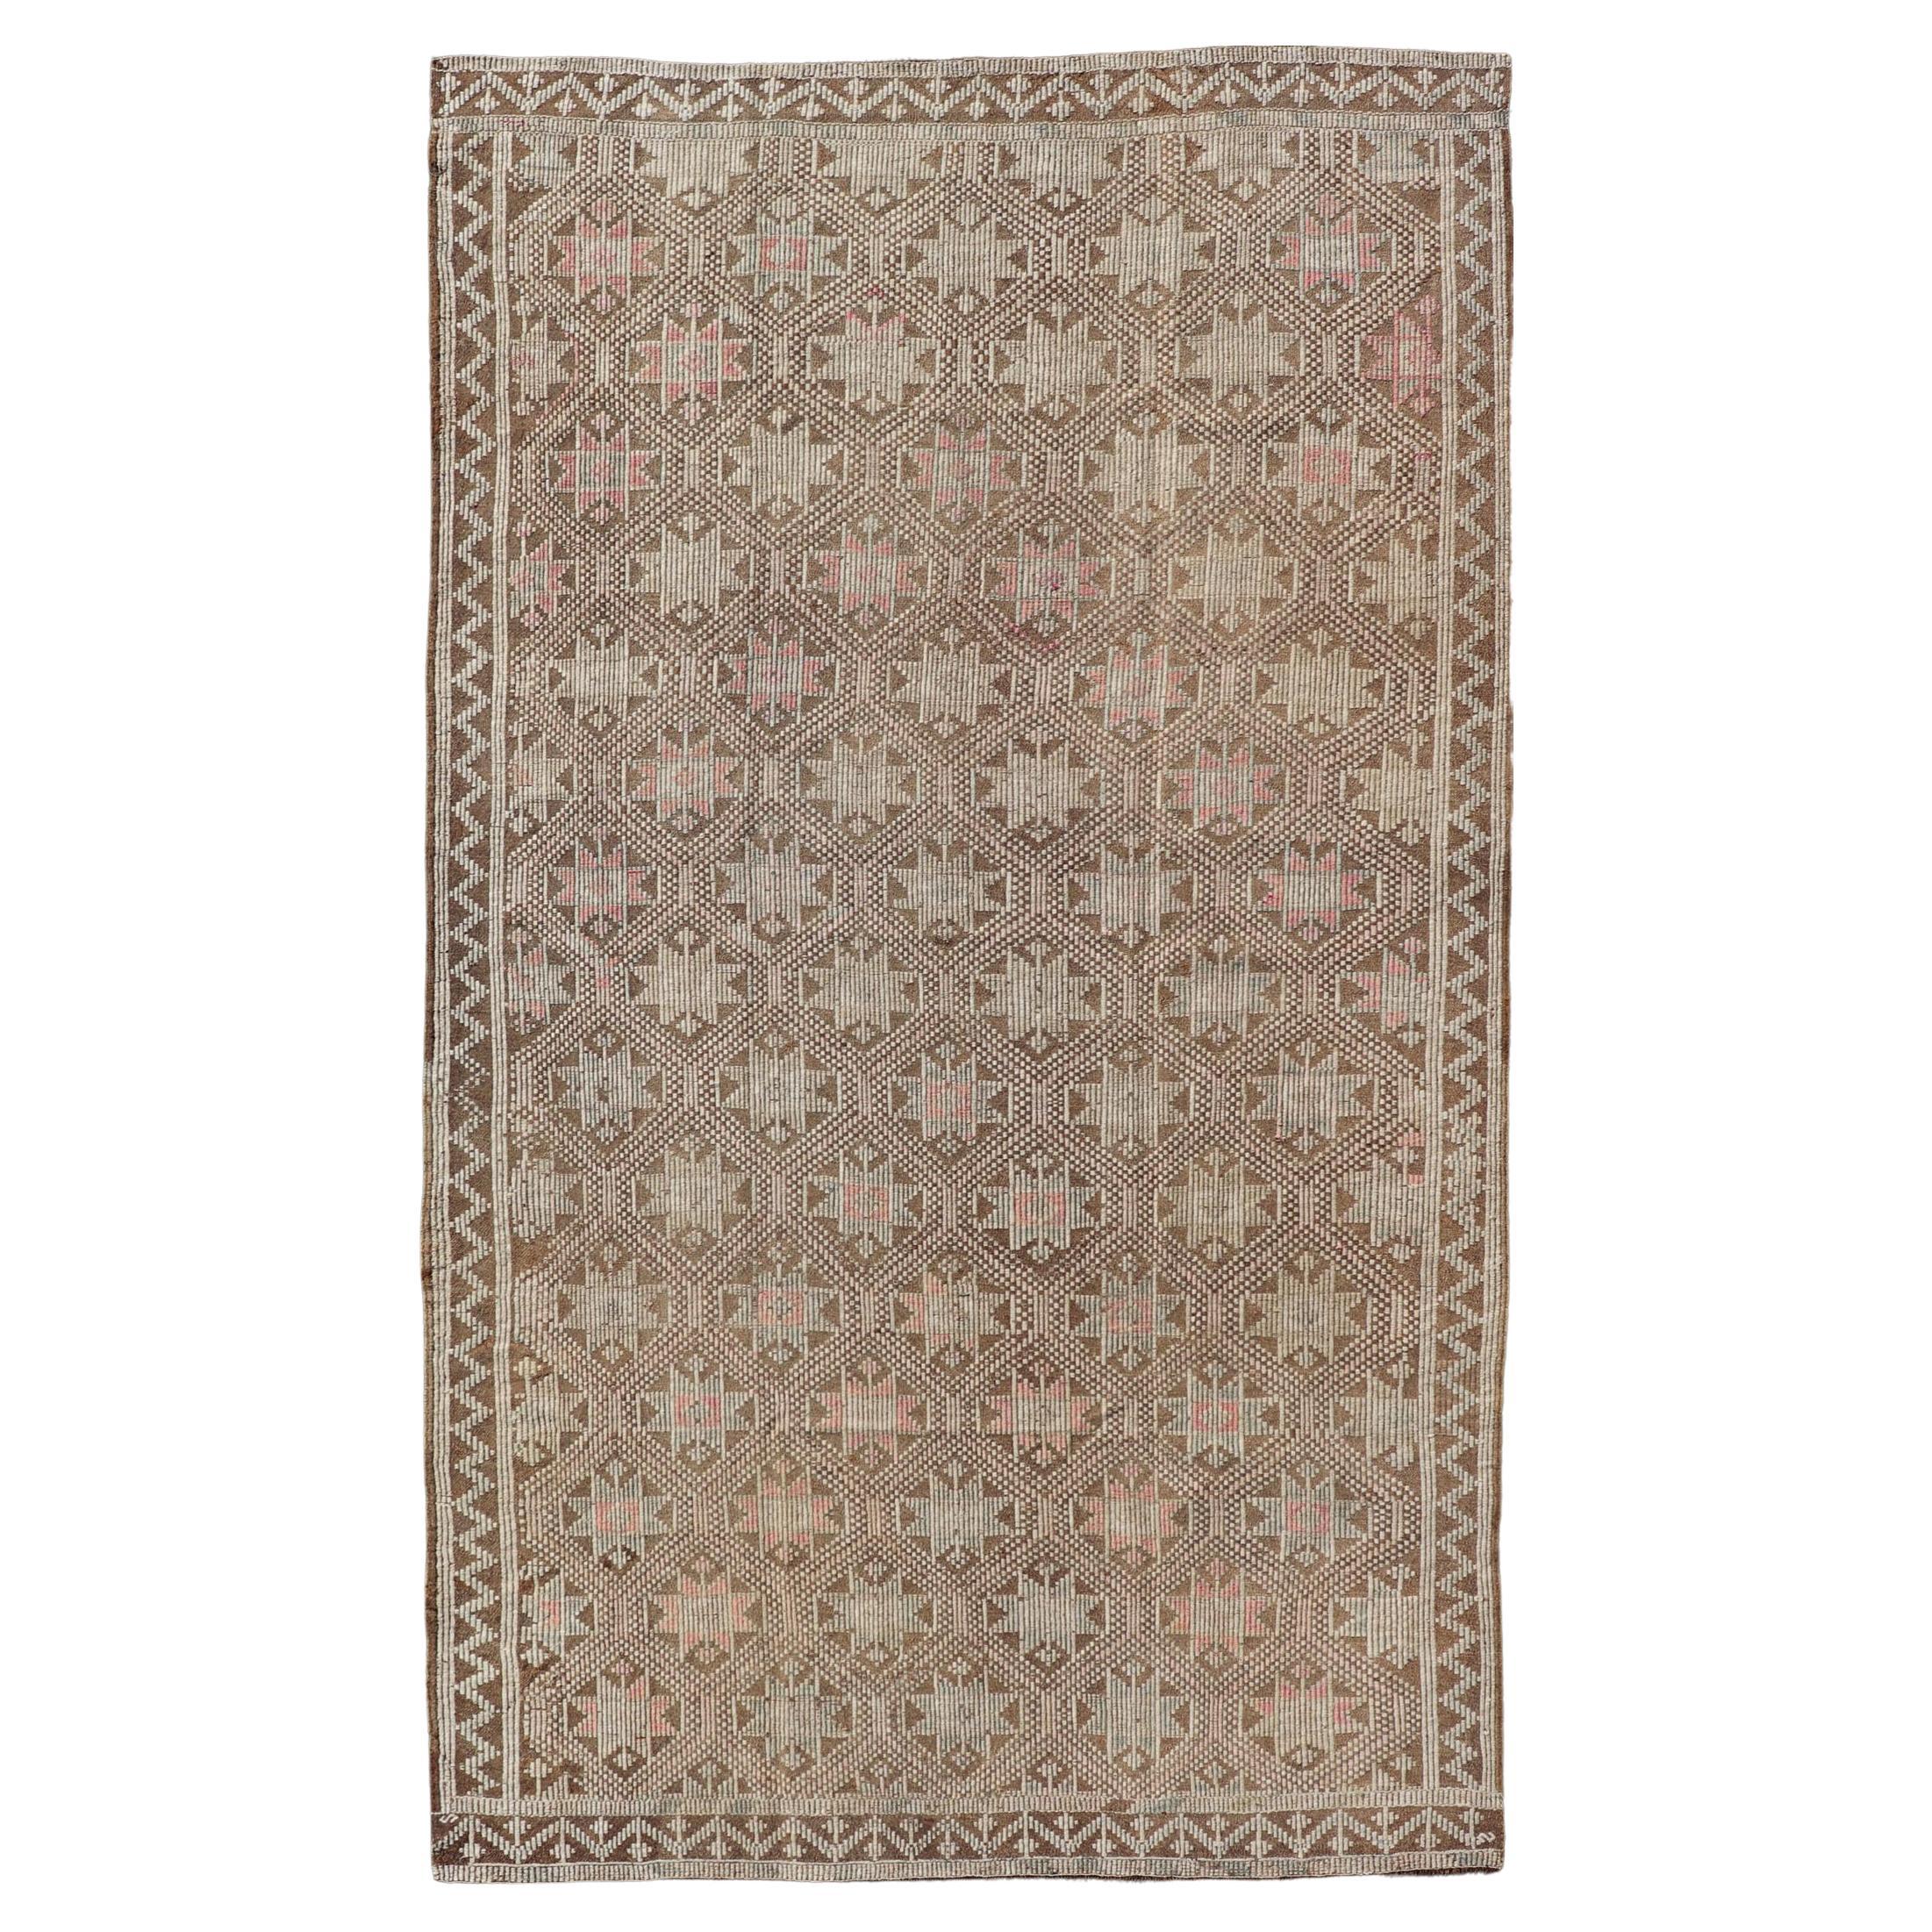 Vintage Turkish Embroidered Kilim with All-Over Star Design on A Taupe Ground 